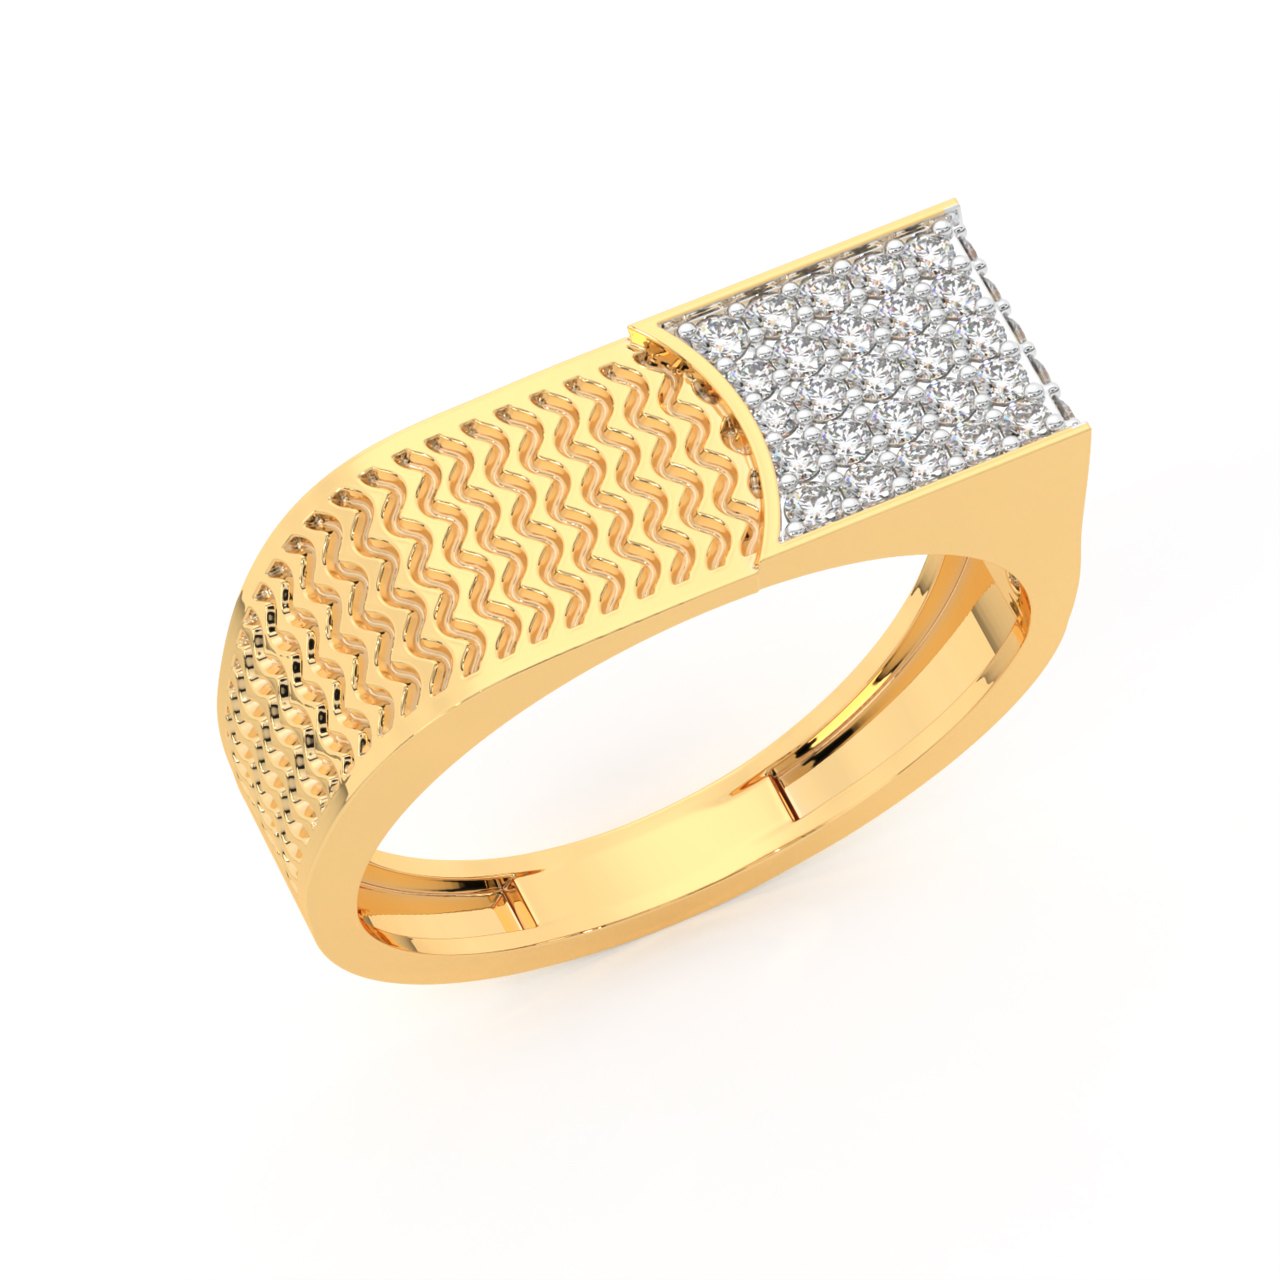 Gold Rings For Men - Buy Gents Gold Rings Online at Best Prices